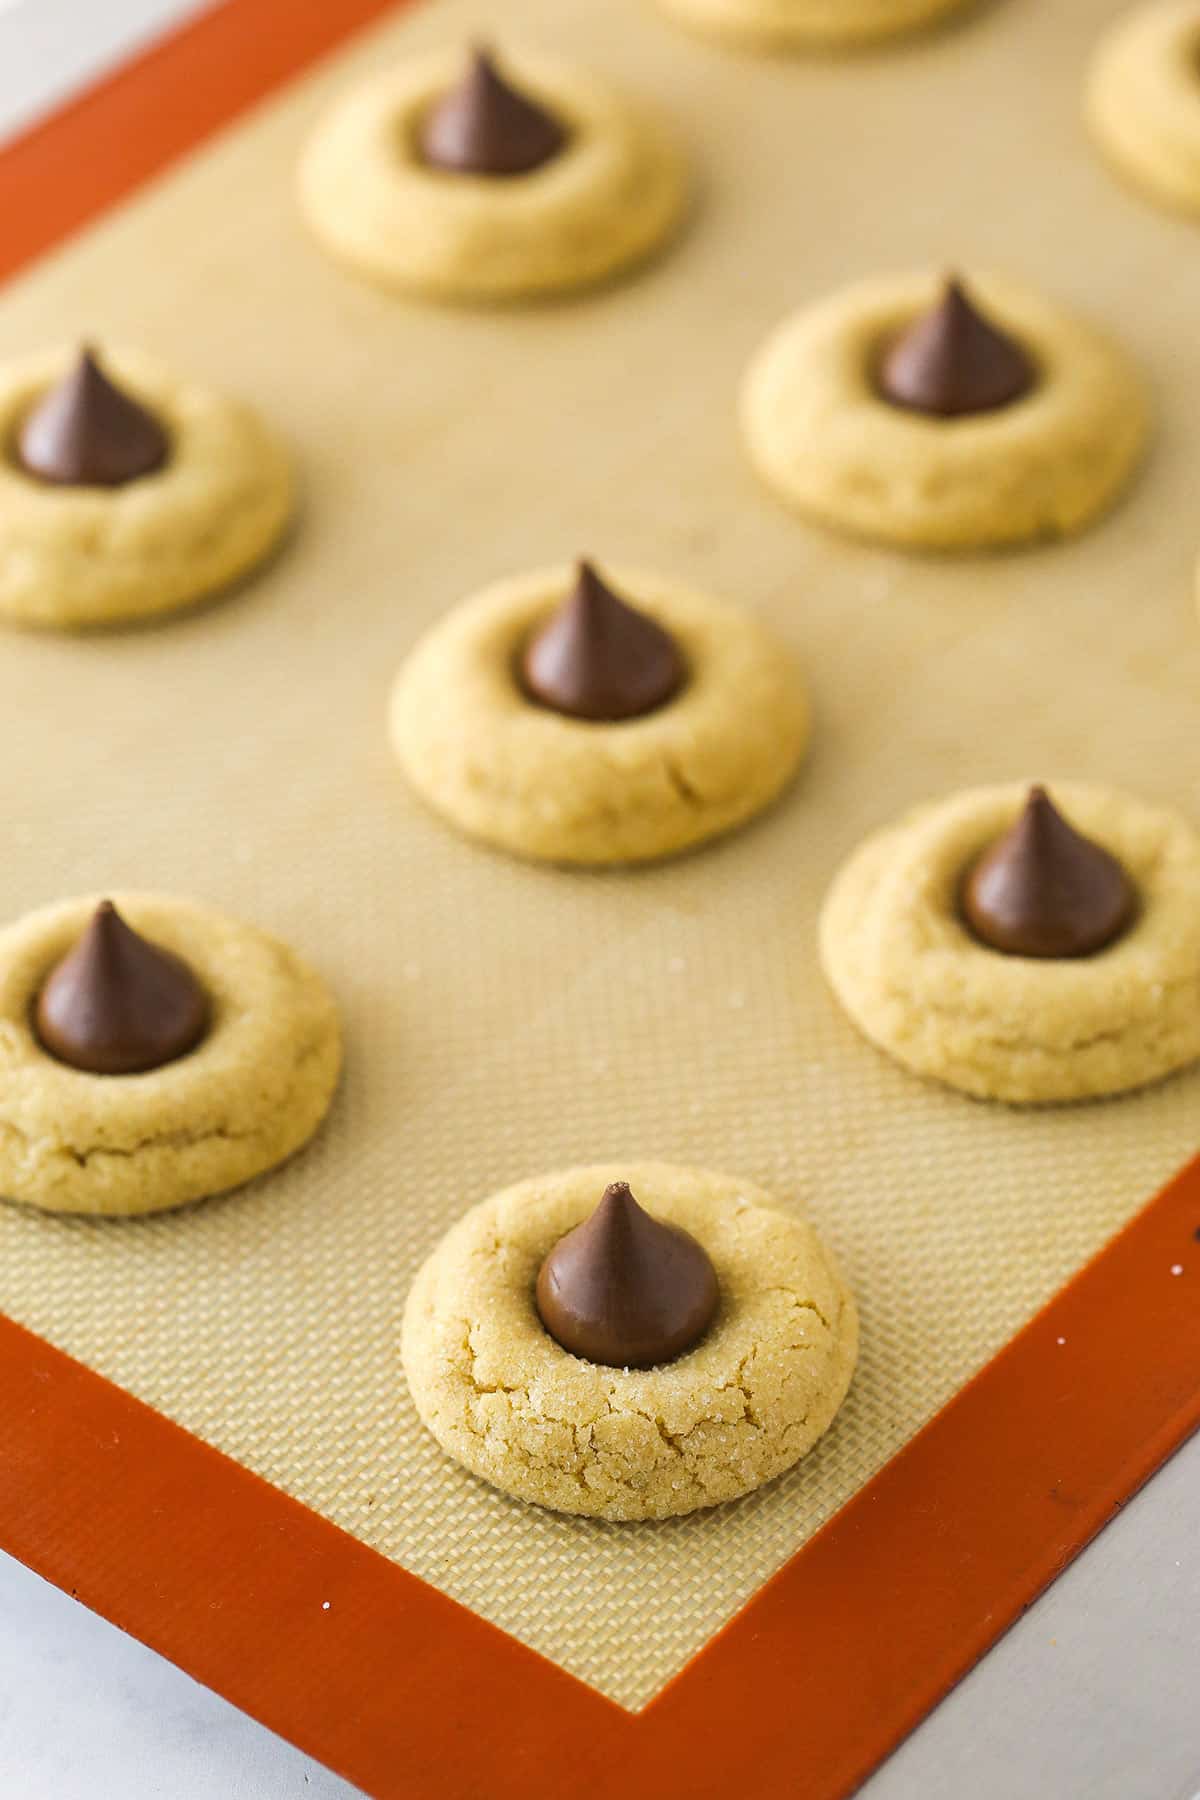 Baked peanut butter blossoms with a Hershey's kiss added.